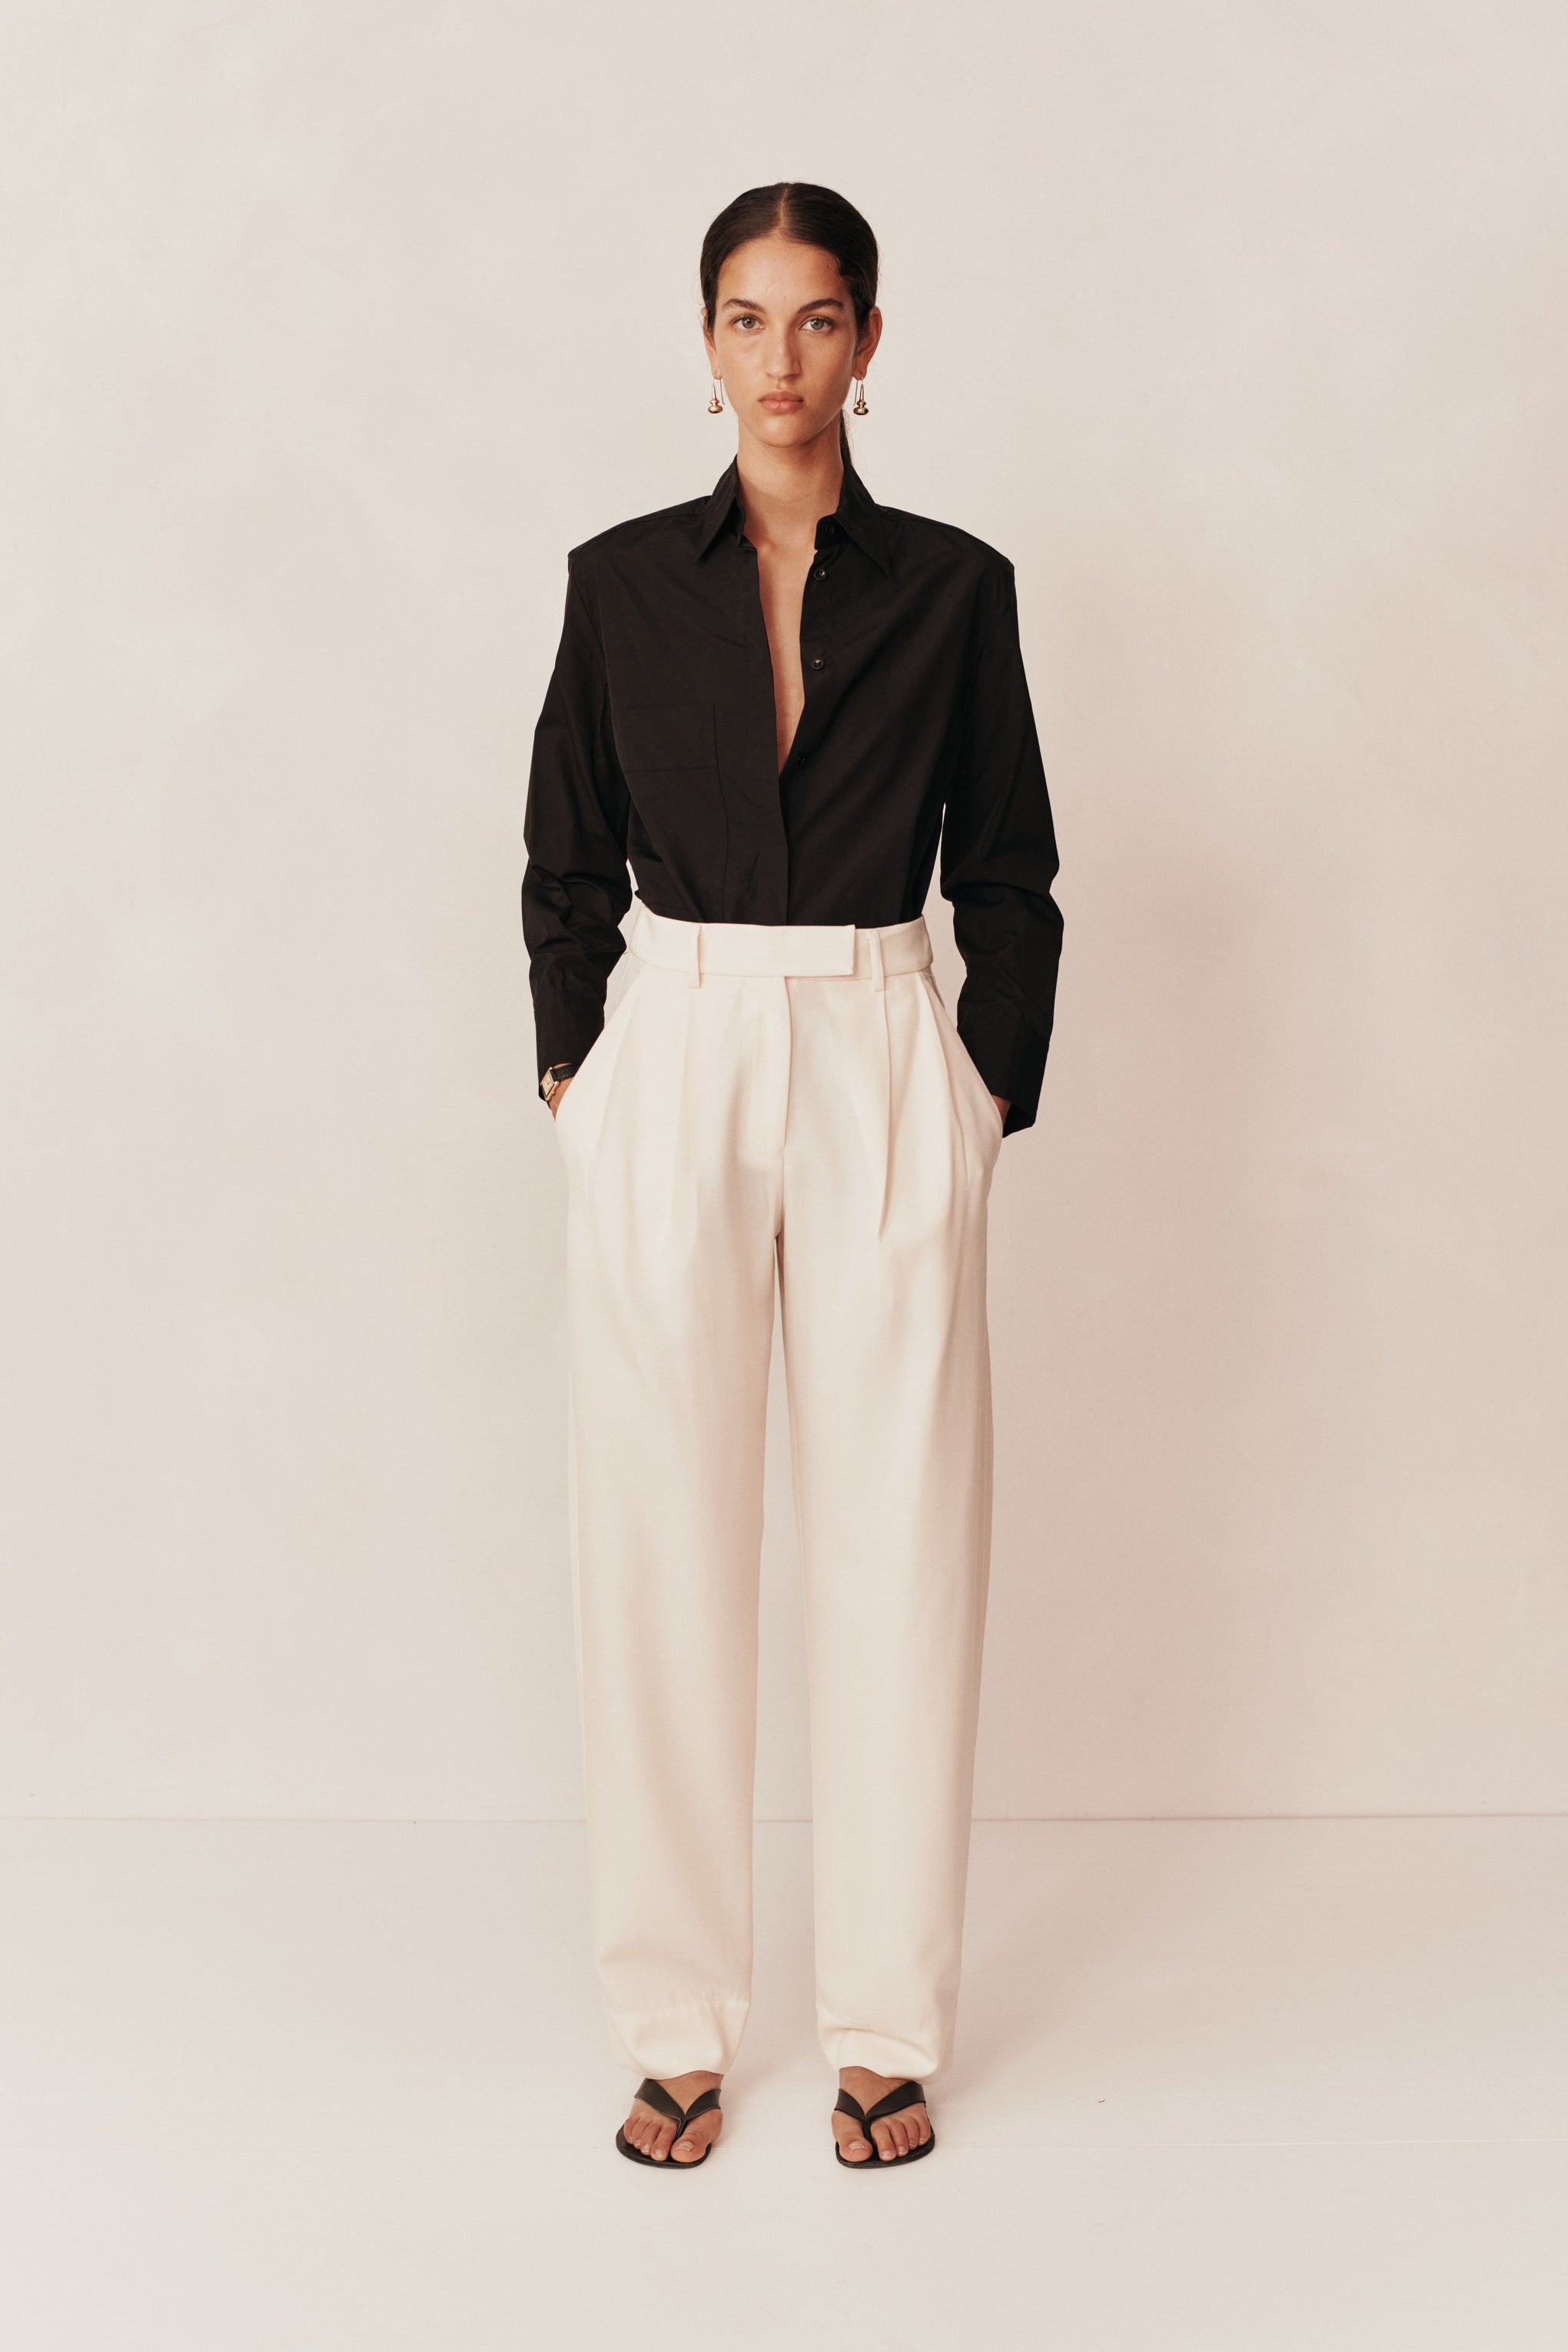 Esse Classico Waist Tailored Trouser in Crema available at TNT The New Trend.